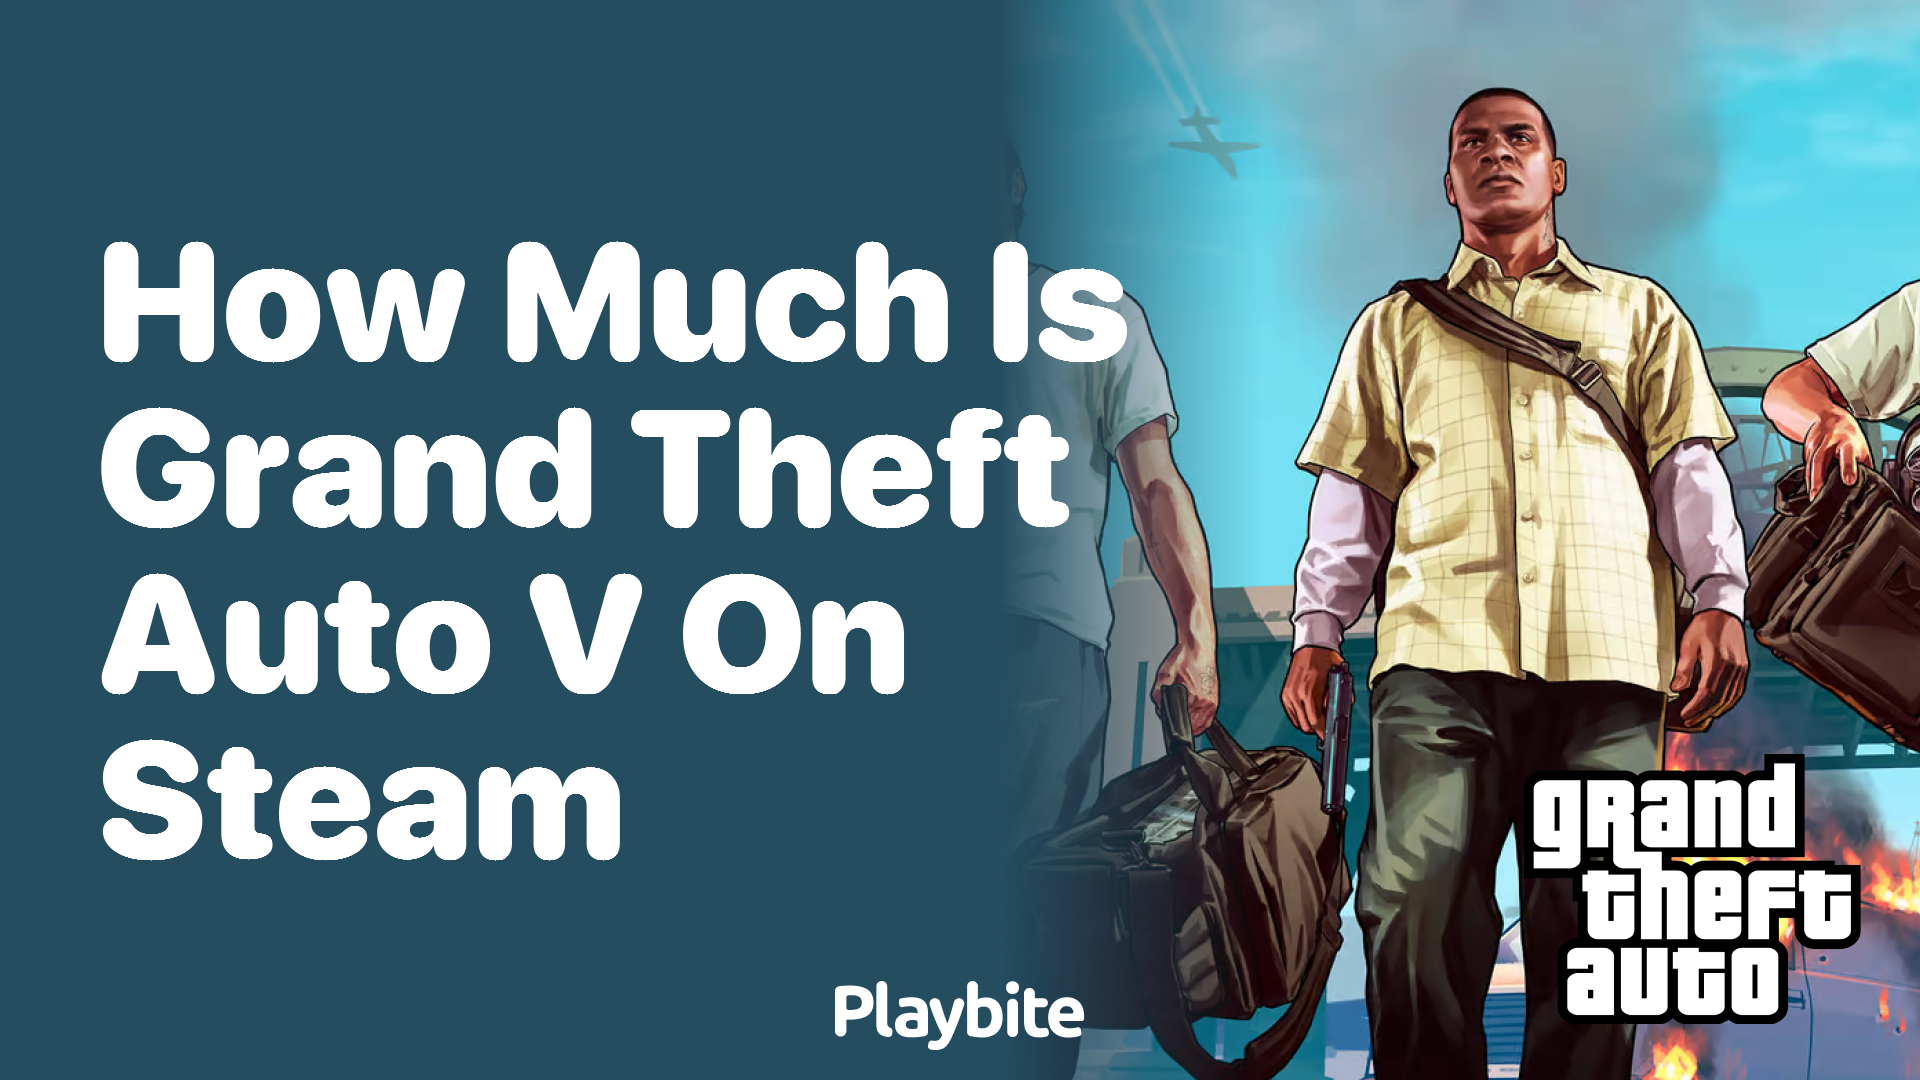 How much is Grand Theft Auto V on Steam?